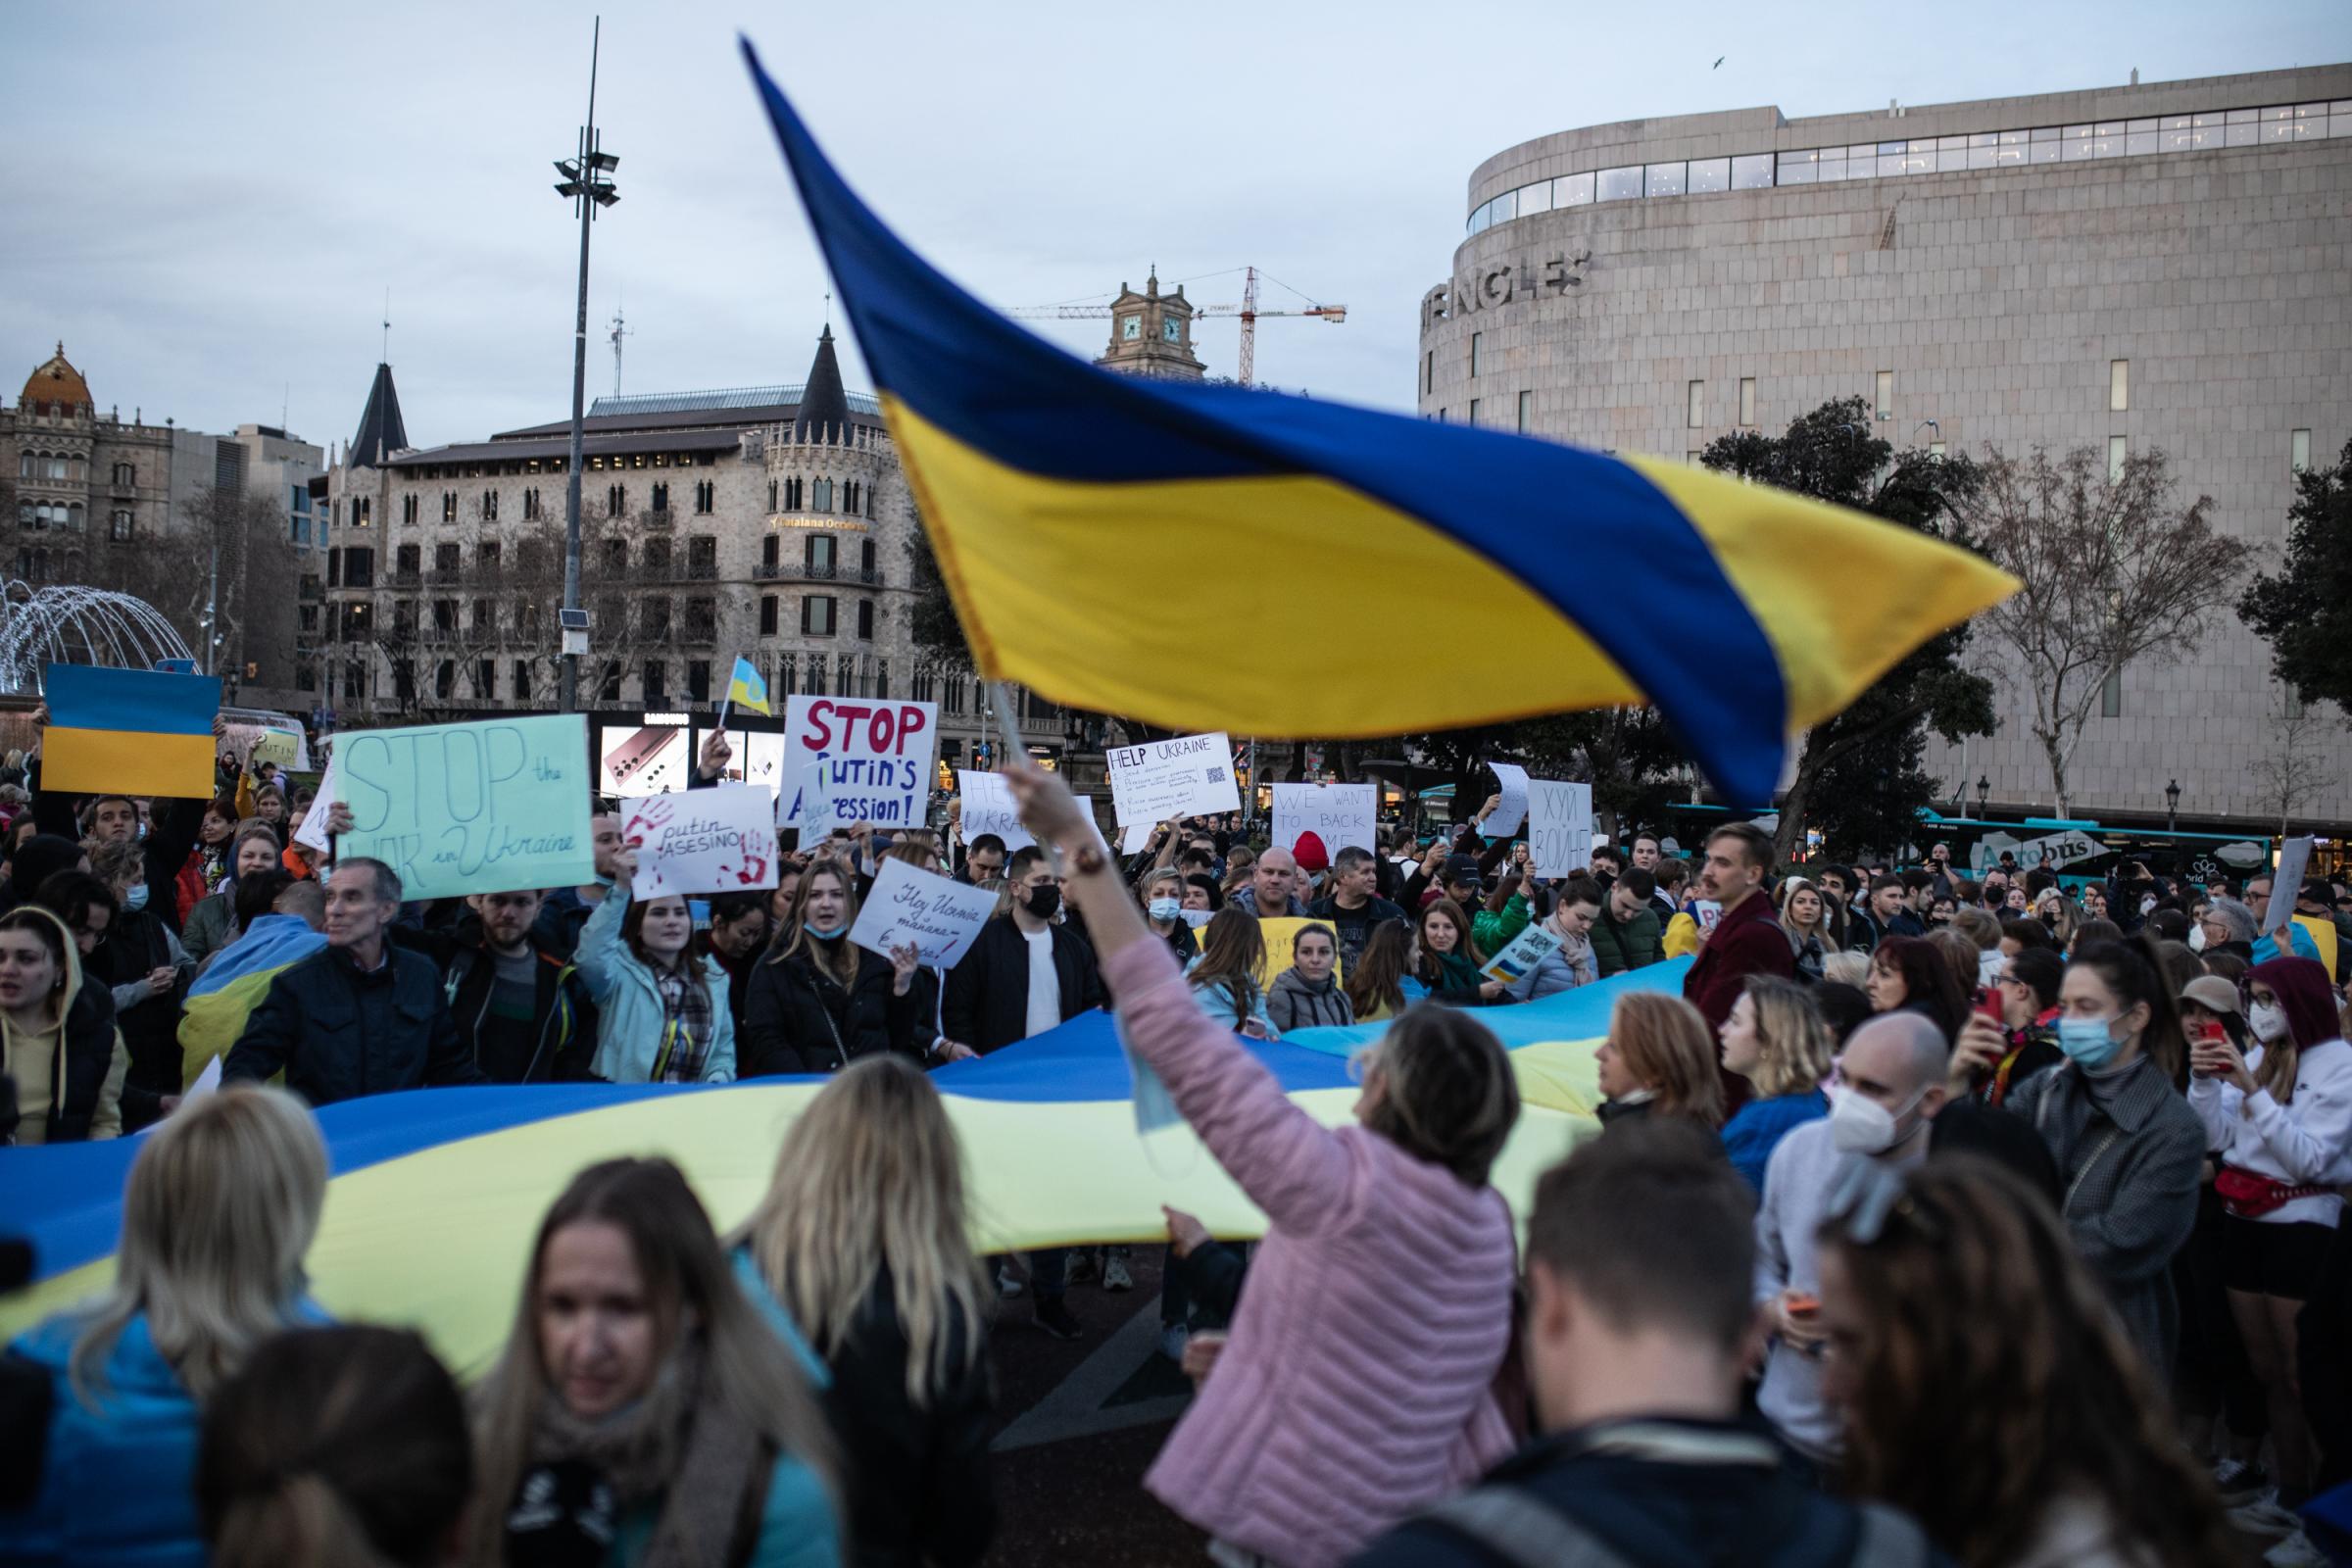 Protestors In Spain Rally For Ukraine After Russian Invasion - BARCELONA, SPAIN - FEBRUARY 24: People protest against...